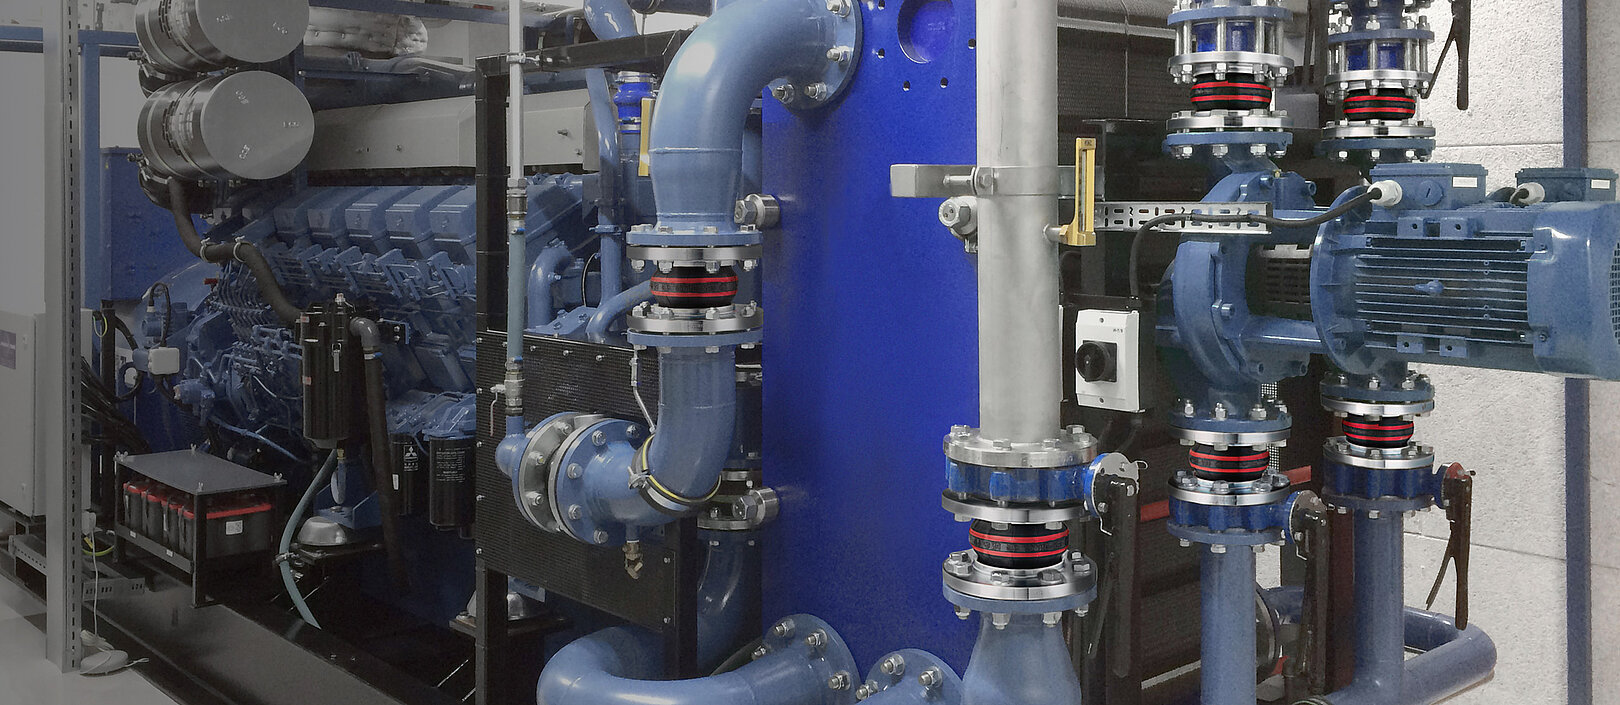 ERV Expansion Joints Installed within Motor Pipe System